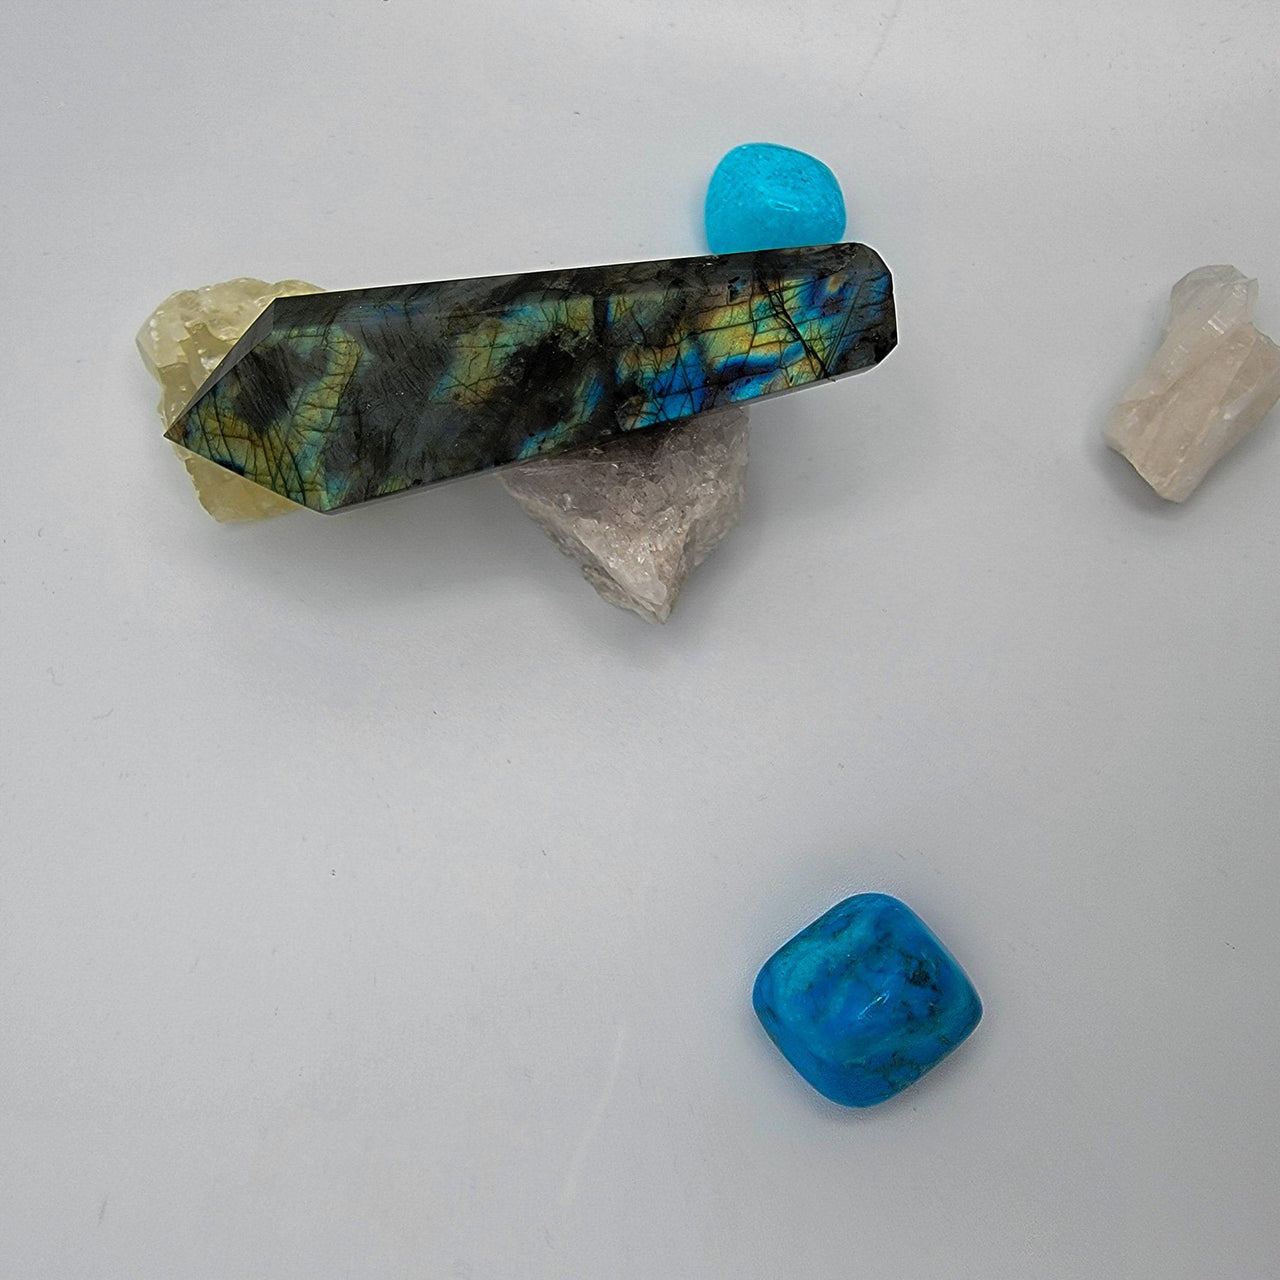 Labradorite Crystal Pipe, buy from our store, we are the best provider in business! Add accessories to your bag and get some free shipping!